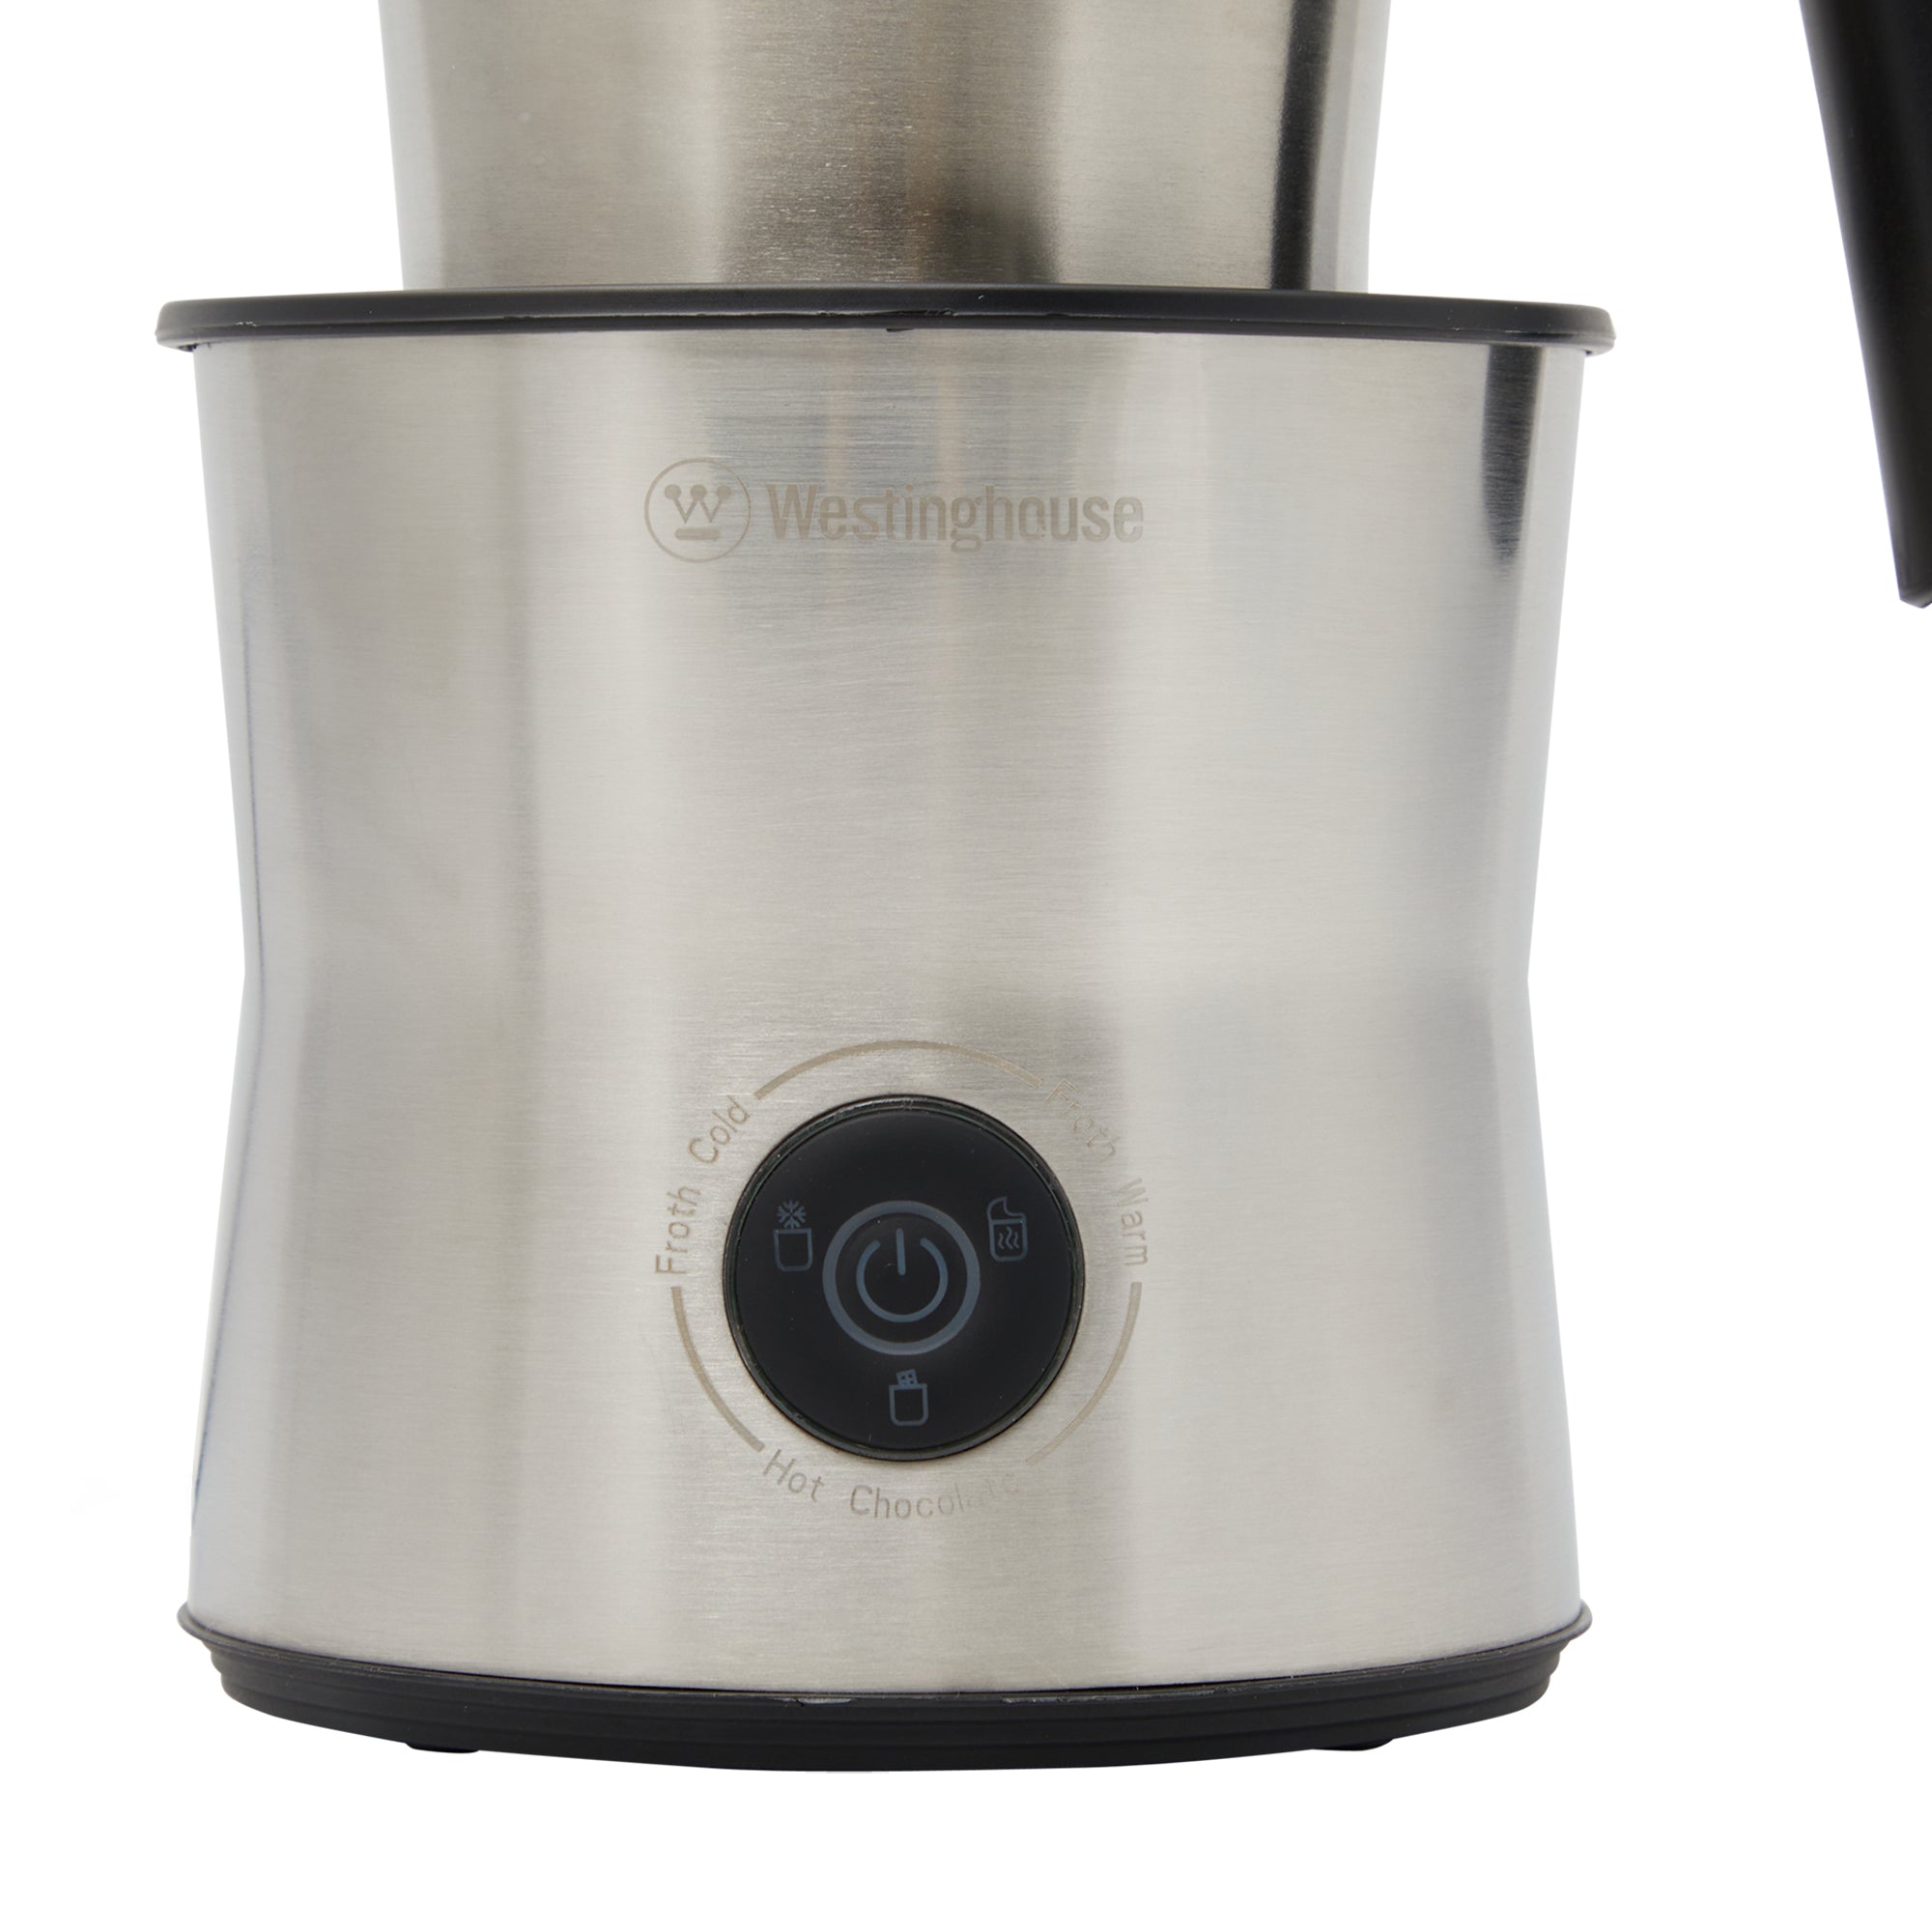 Westinghouse + Cordless Milk Frother